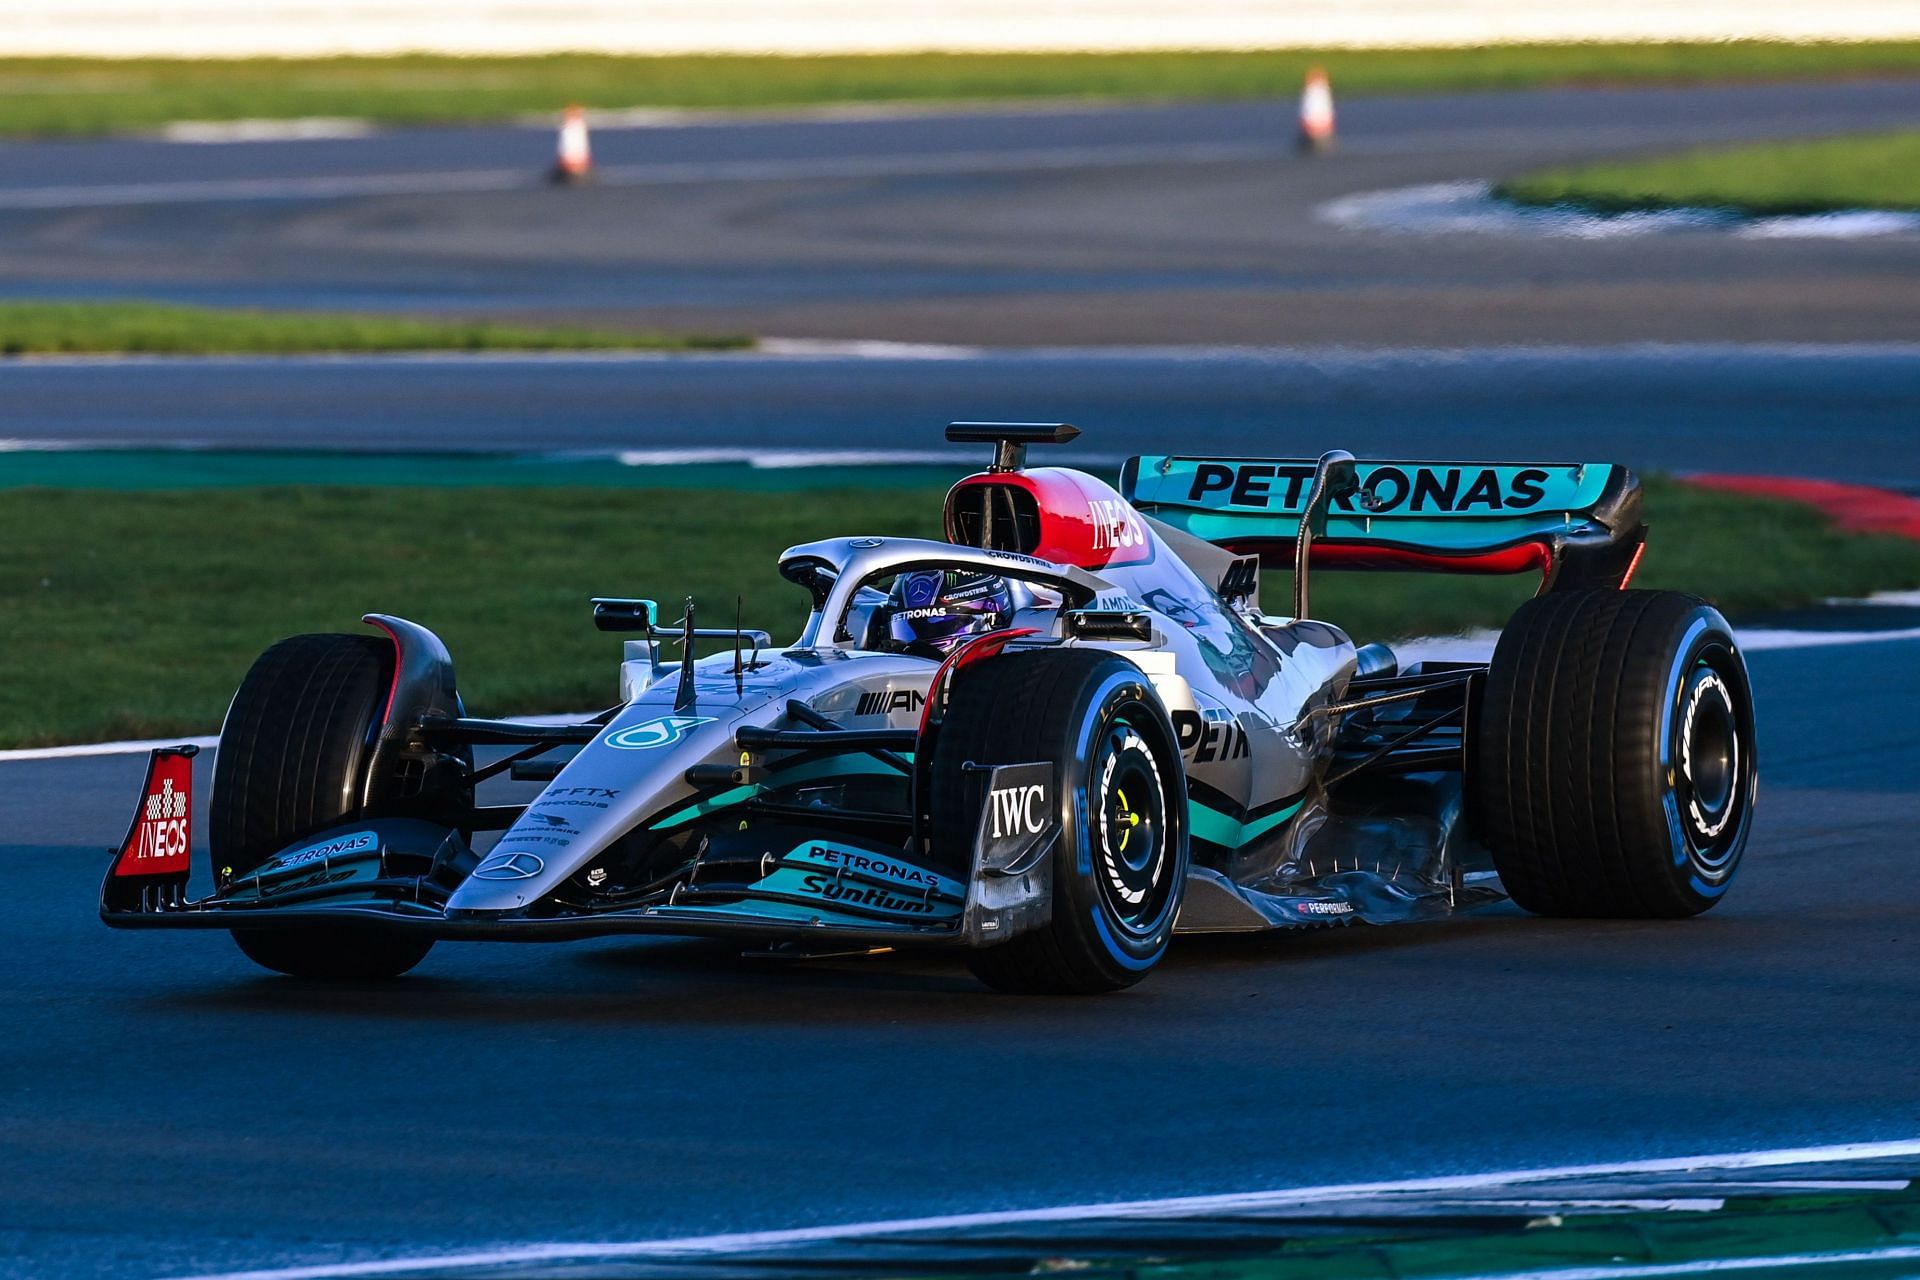 Photos: Lewis Hamilton's new Mercedes W13 has been revealed and the picture are out